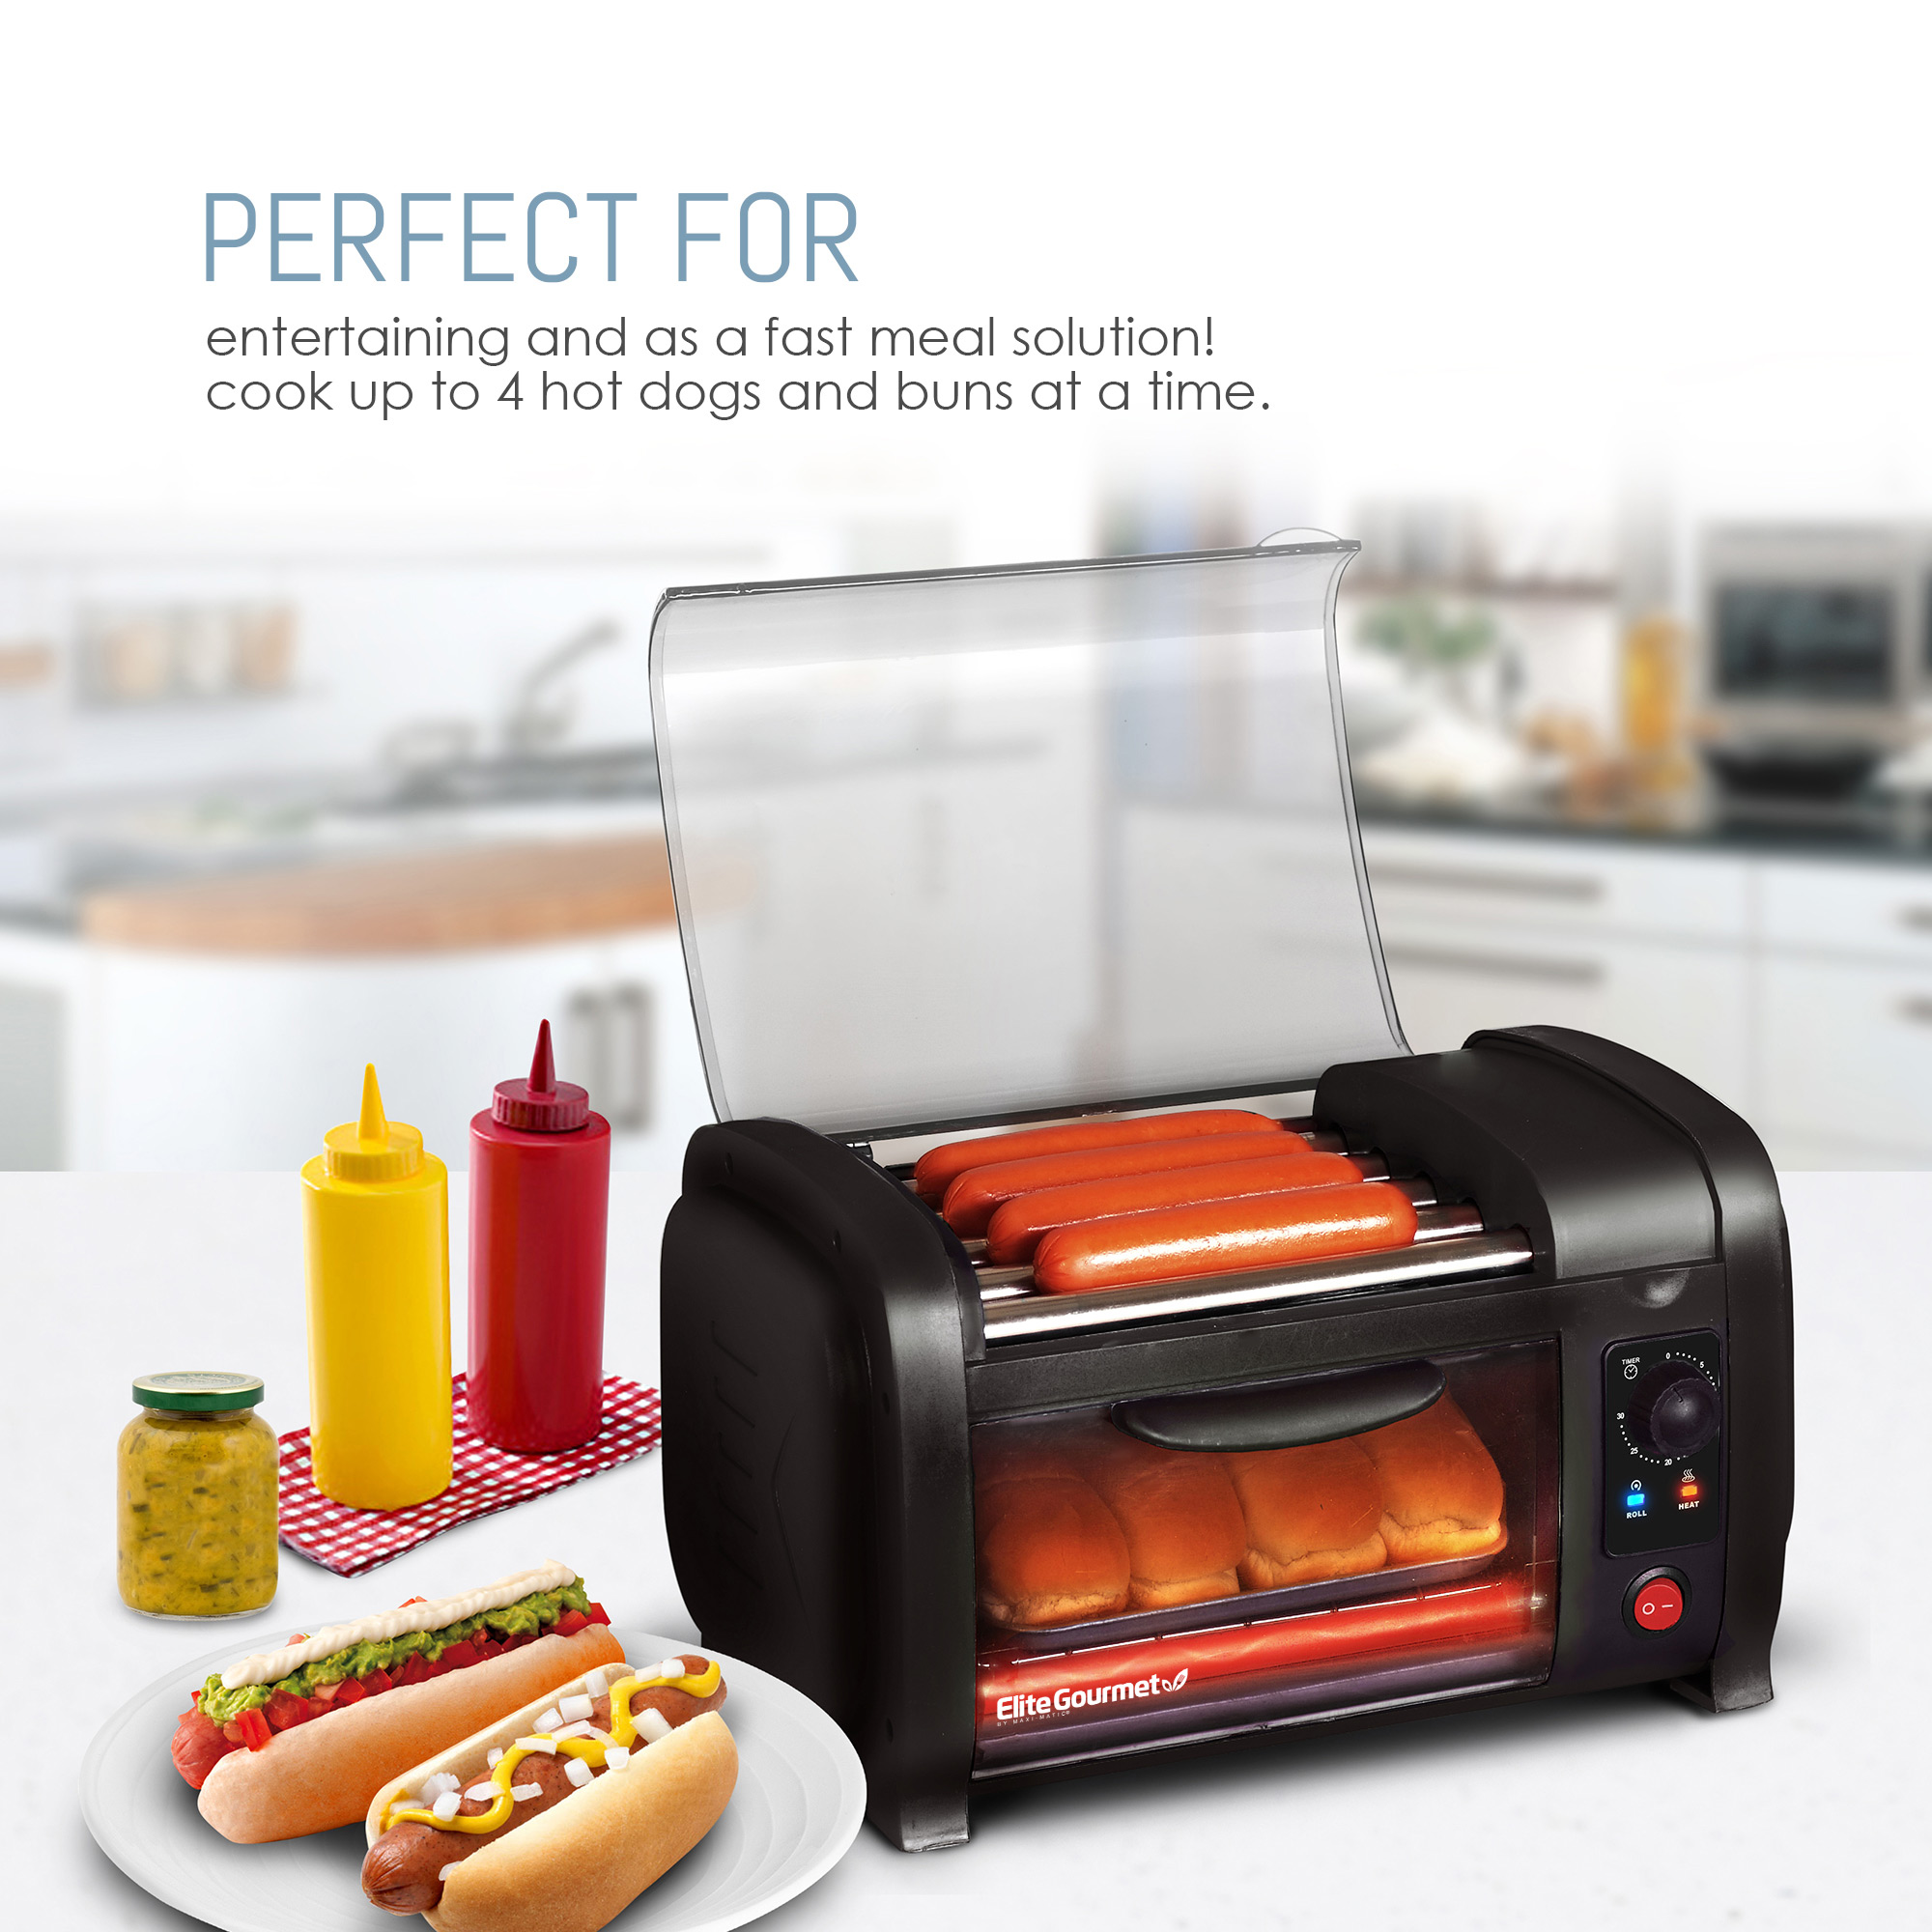 Elite Gourmet EHD-051B New Cuisine  Hot Dog Roller and Toaster Oven, Black - image 5 of 6